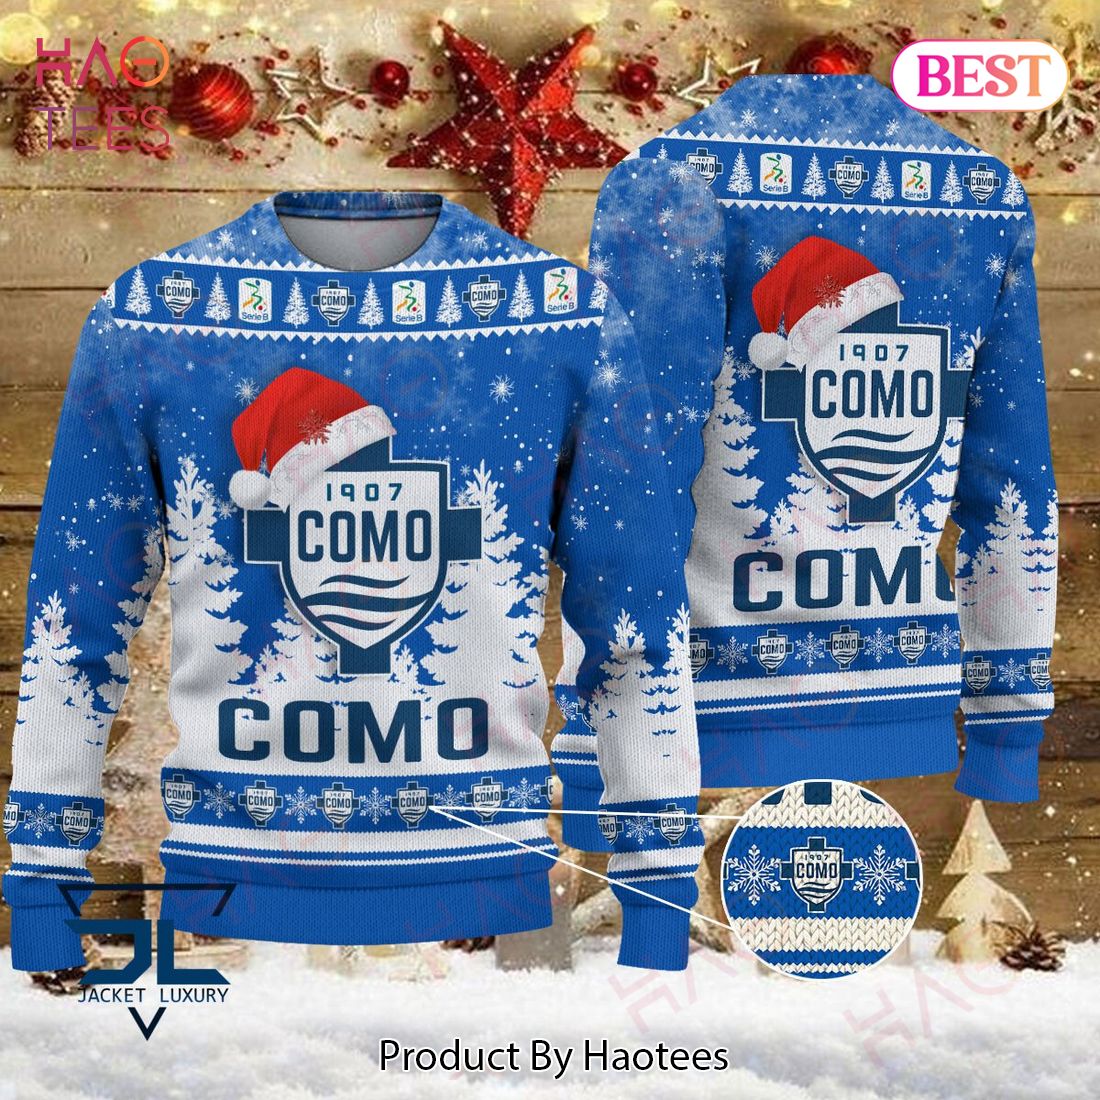 HOT Como 1907 Blue Mix White Christmas Luxury Brand Sweater Limited Edition